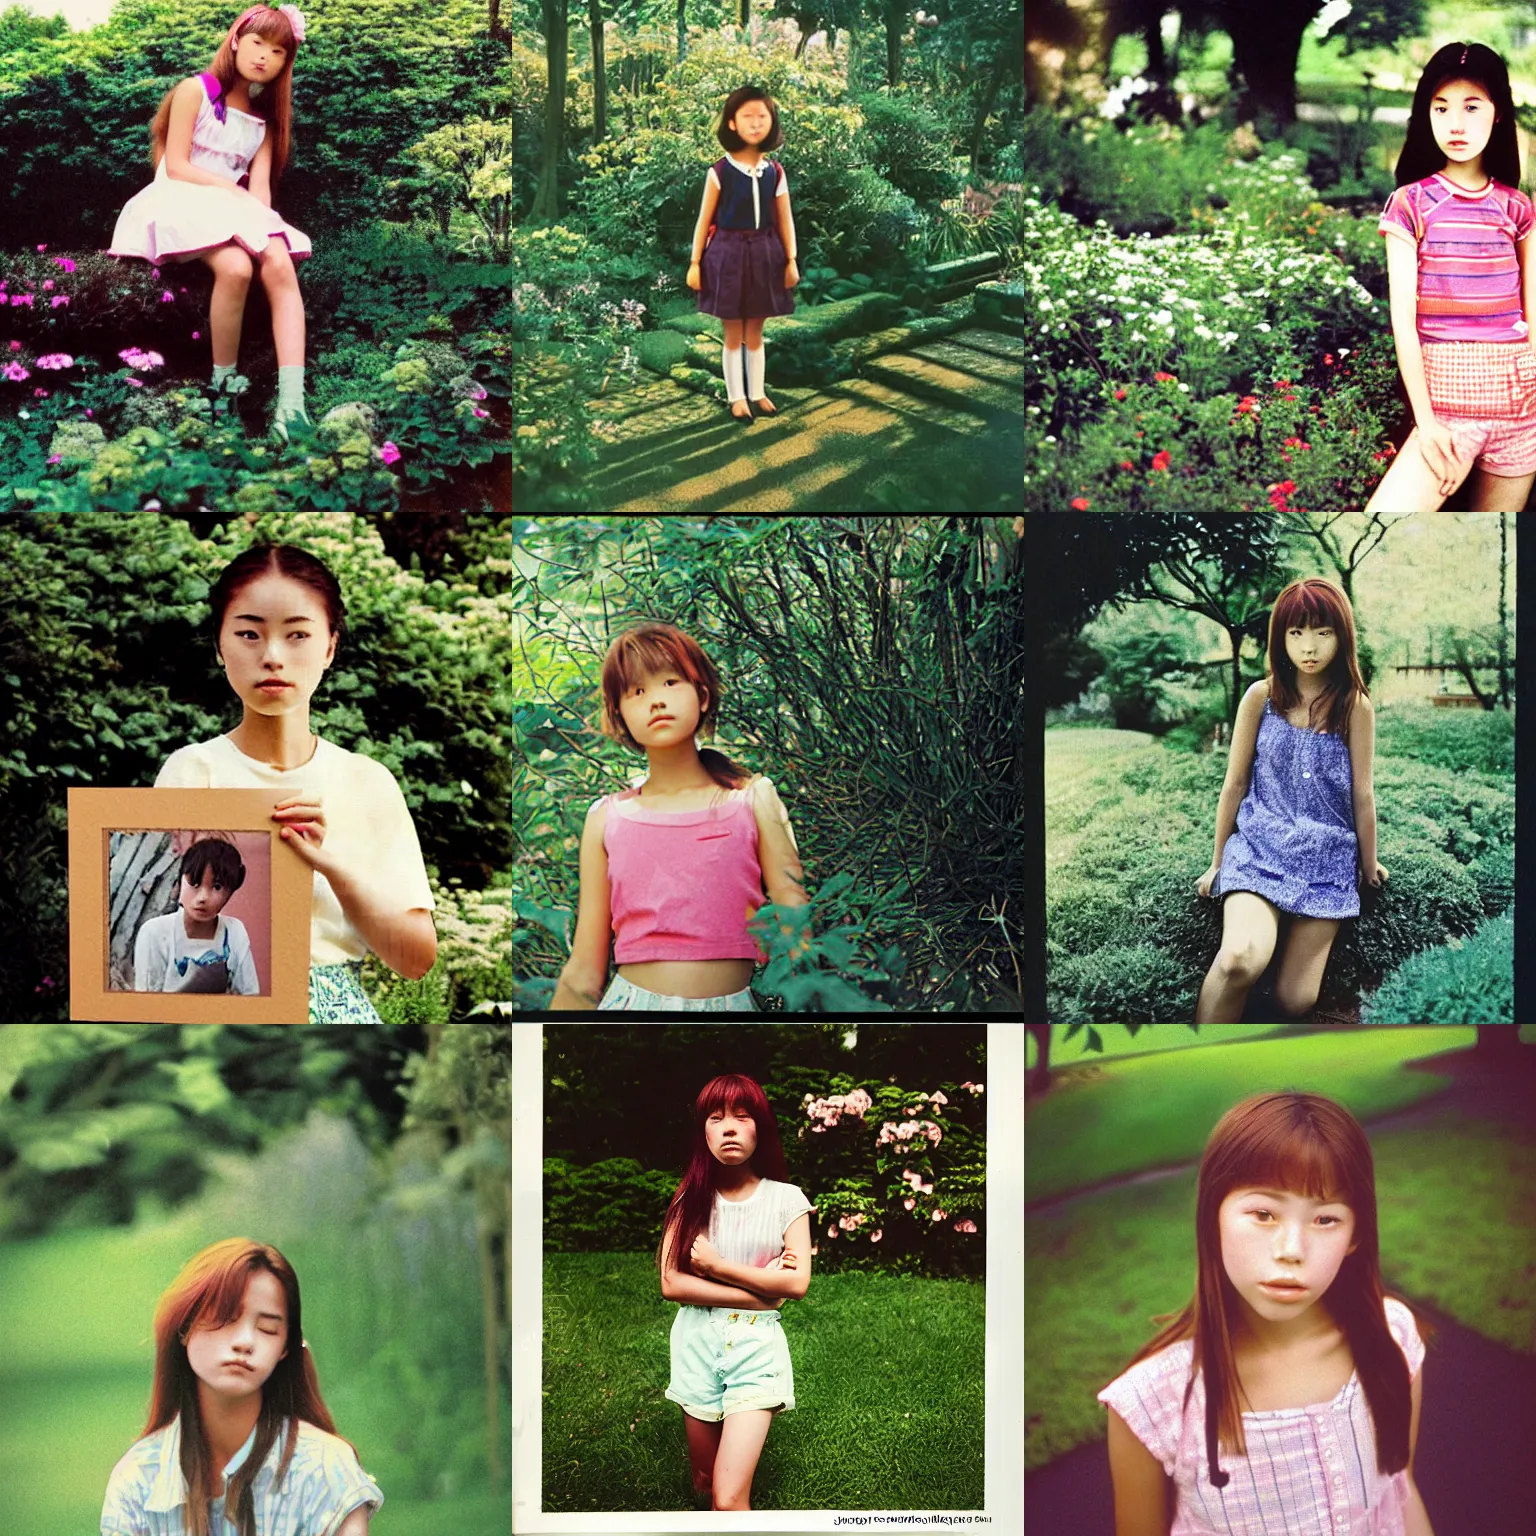 Prompt: A long-shot from front, color outdoor photograph portrait of a teen girl in the garden, summer, day lighting, 1990 photo from Japanese photograph Magazine.